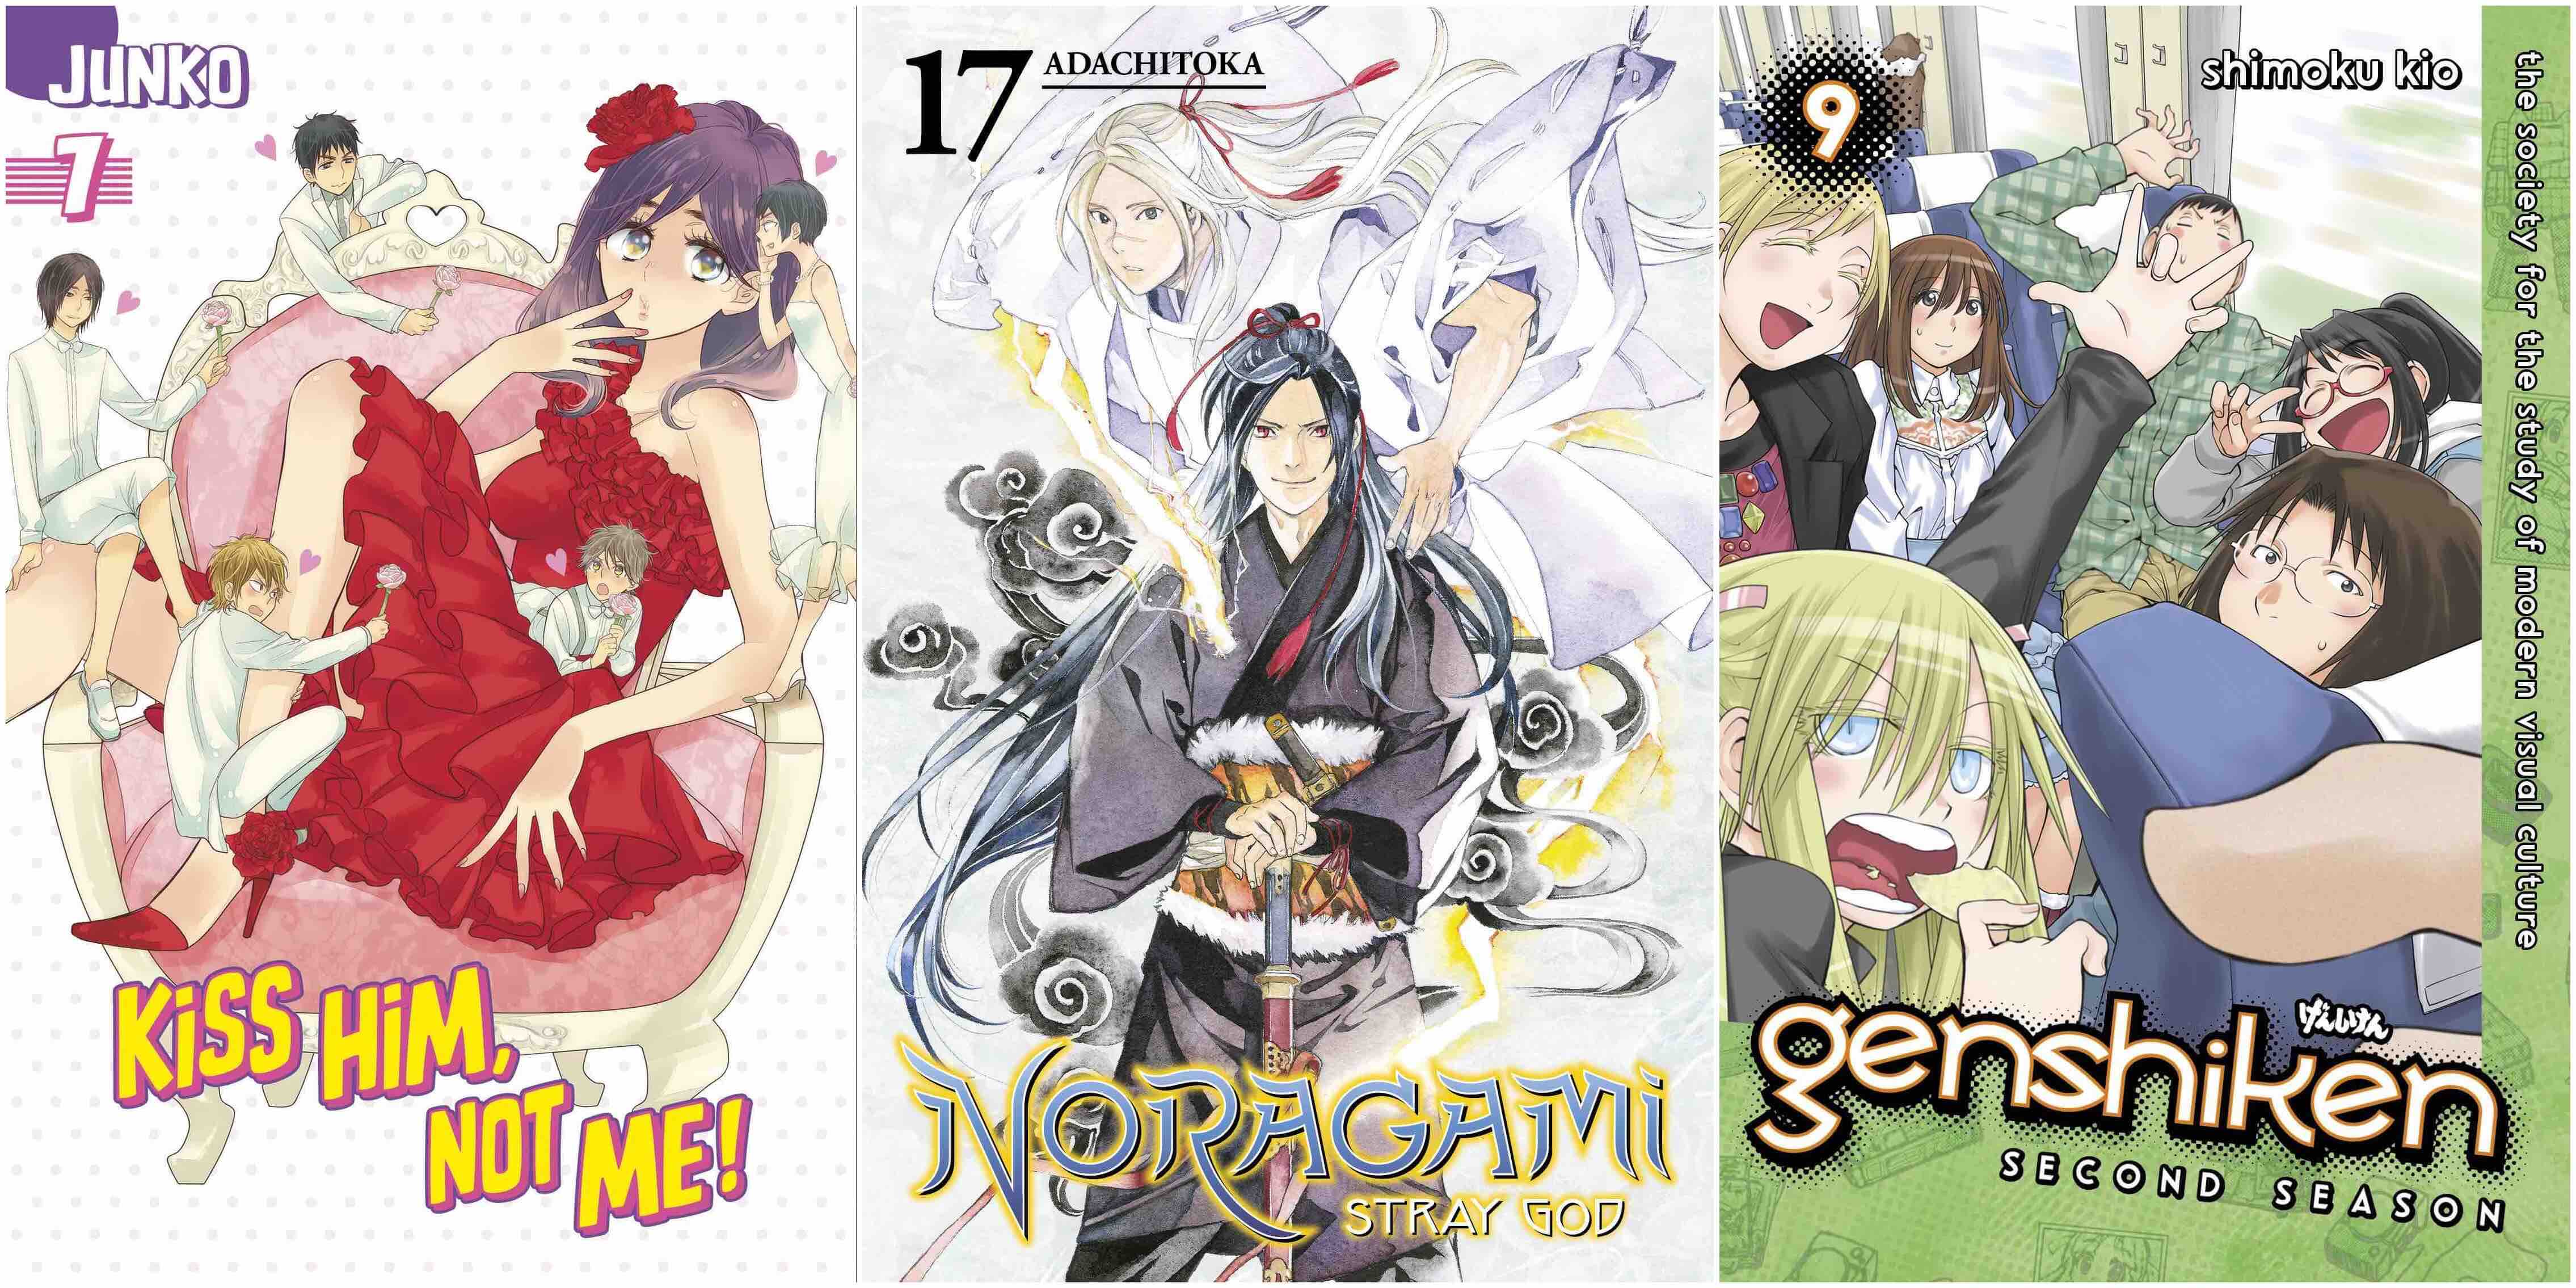 October 2016 Manga Releases Covers for Kiss Him Not Me, Noragami, and Genshiken: Second Season.